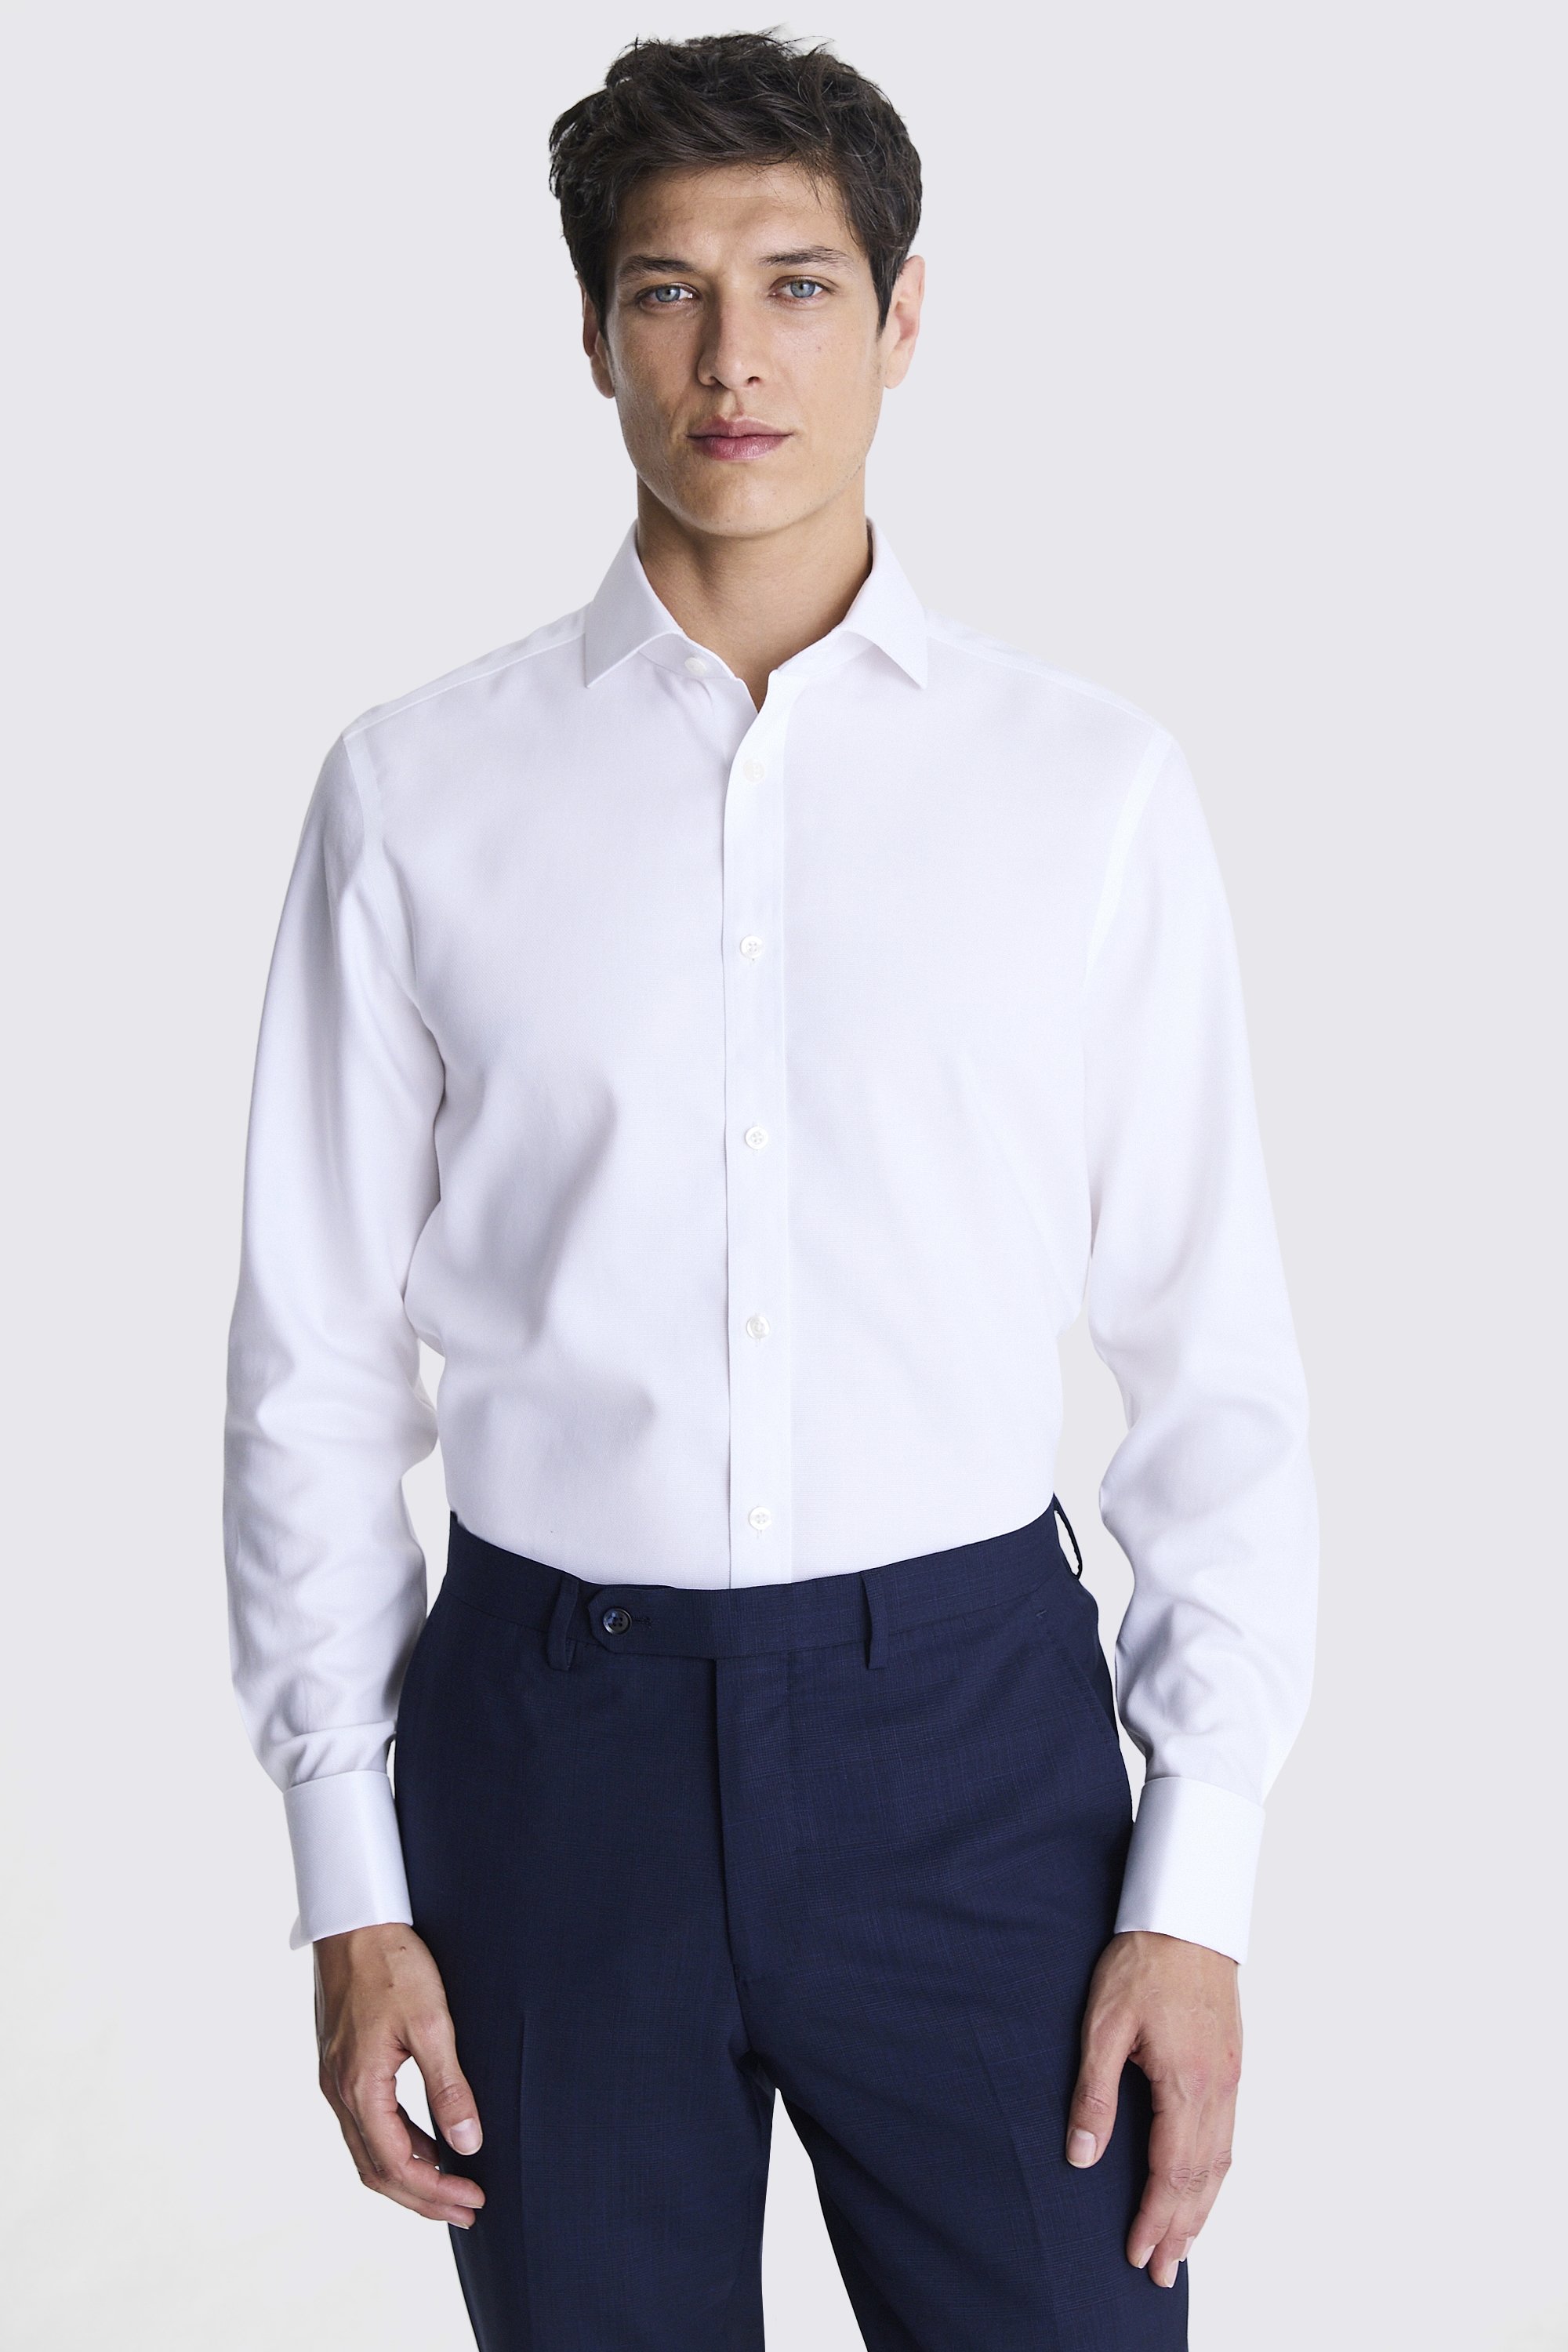 Tailored Fit White Royal Oxford Non Iron Shirt | Buy Online at Moss